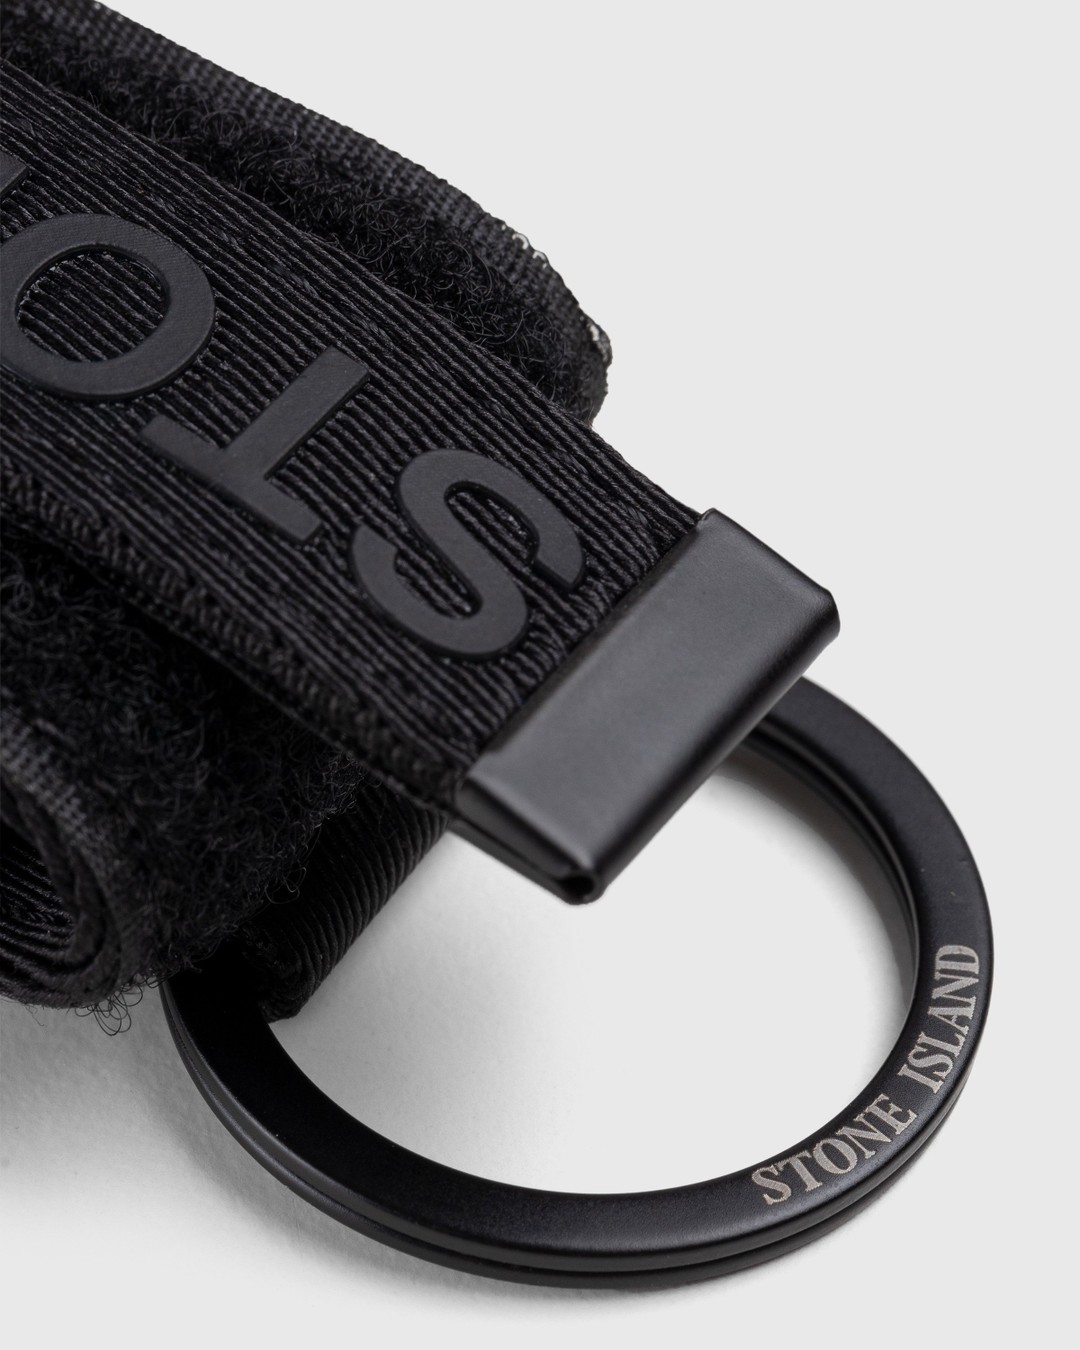 Stone Island – AirPods Case With Key Holder Black - Air Pod Cases - Black - Image 5